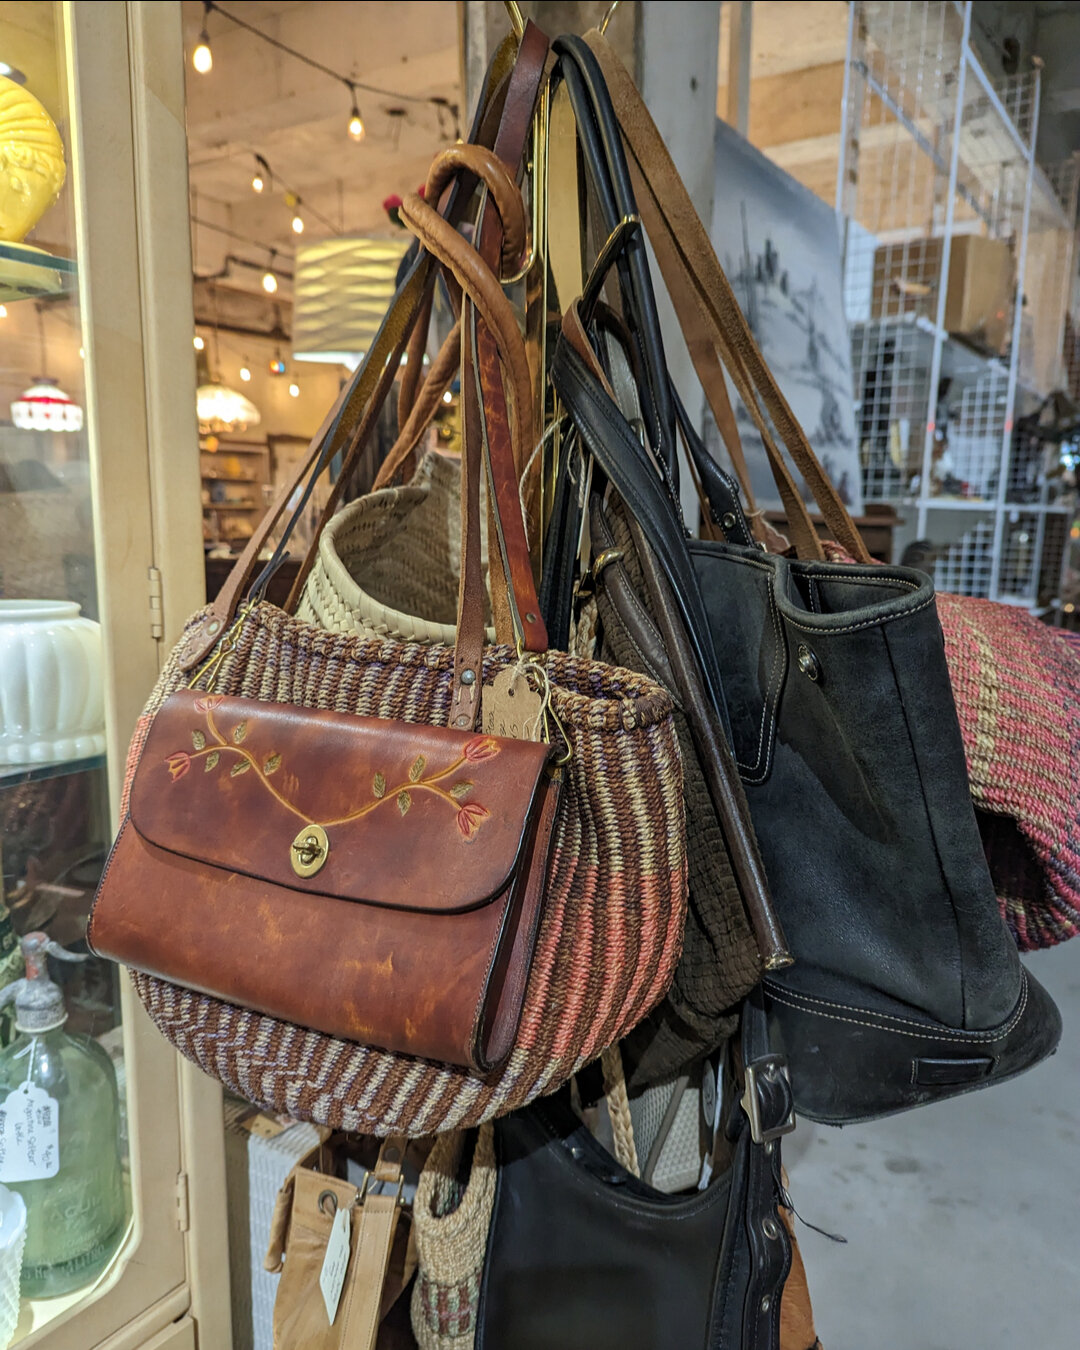 Looked at these bags...vintaged tooled leather, Coach, and so much more!!! Available at Antiques at Railway Commons, 400 Burnet Ave Syracuse.  Open Wednesday-Saturday 11:00-5:30, Sunday 11:00-4:00. @antiquesatrailwaycommons @sofleasyracuse